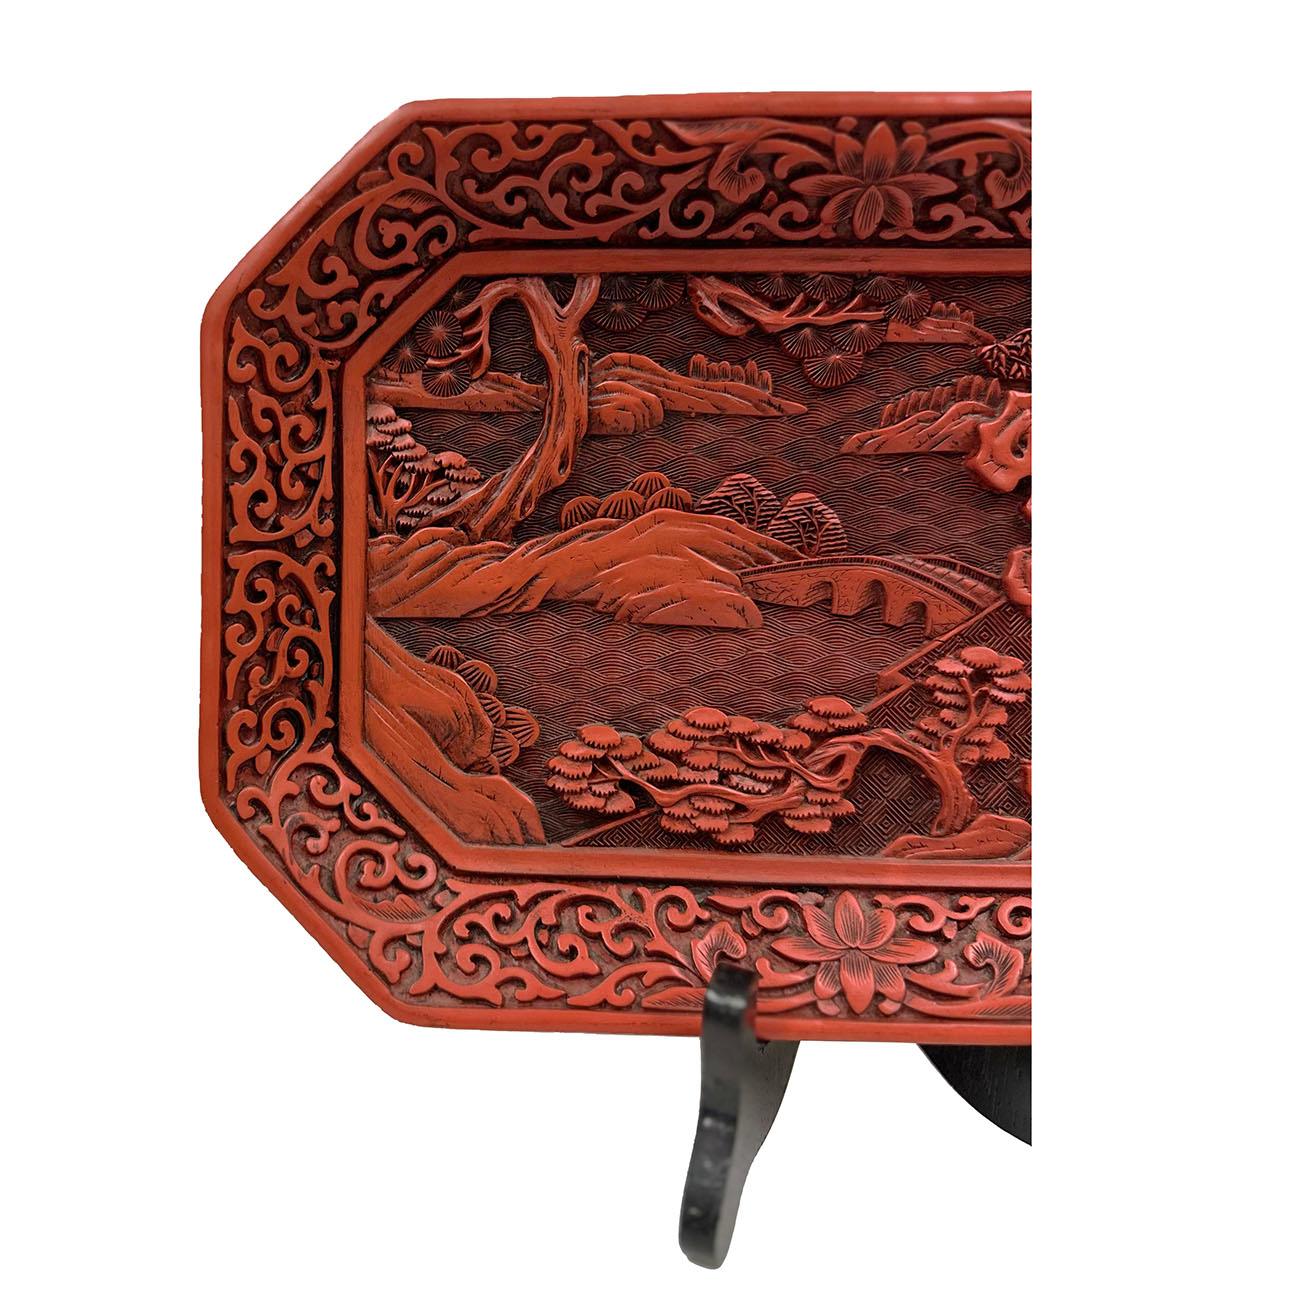 This stunning Chinese hand carved cinnabar lacquered plate has Intricate lacquer carving arts of Chinese traditional archetecture and landscape design. It named The Sense of Tough, an original works of art in the tradition of Chinese folks arts. It